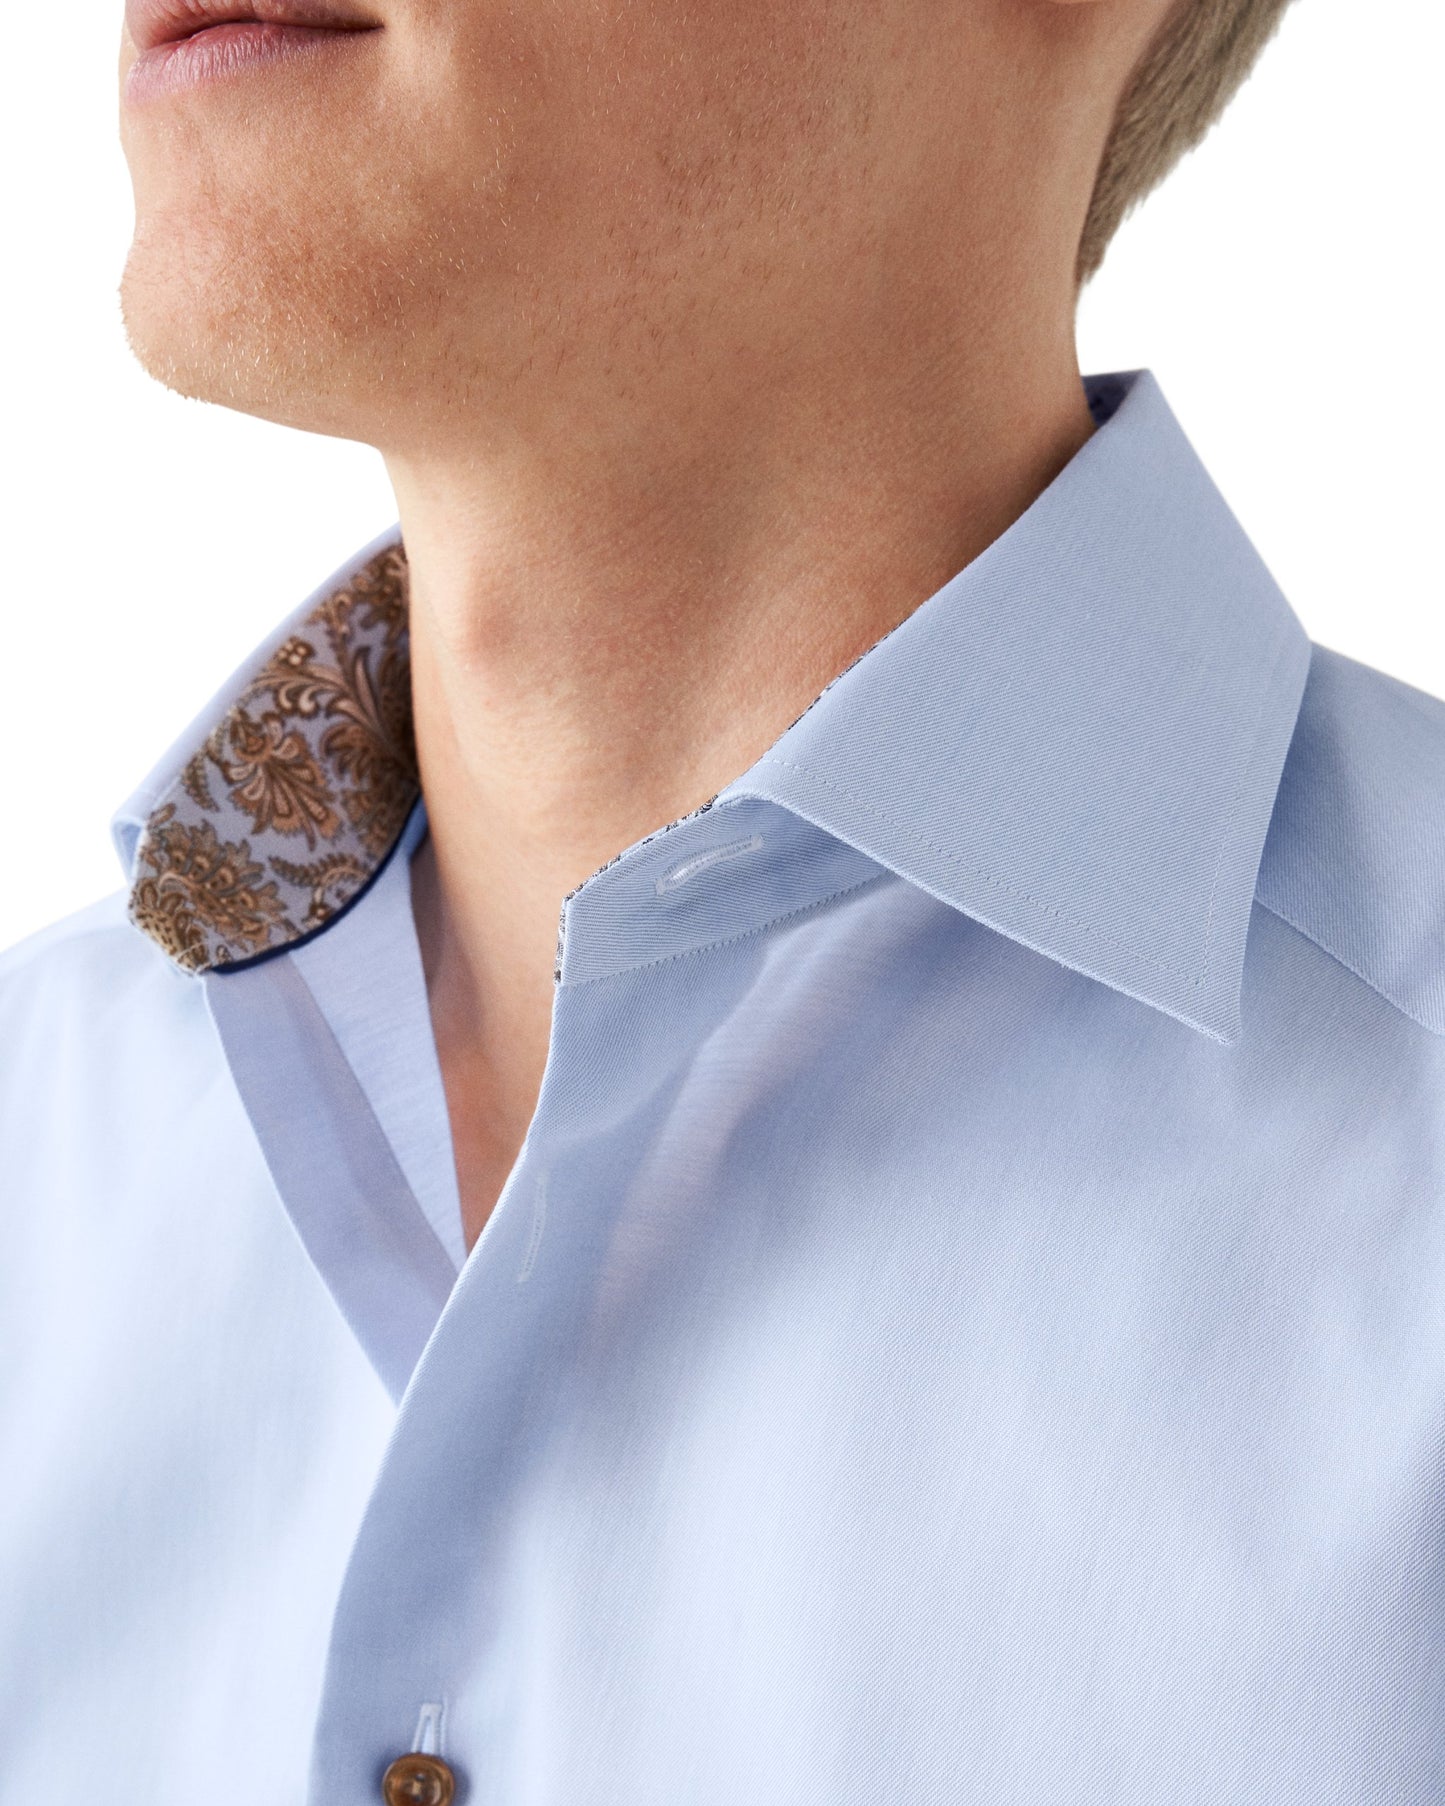 ETON Signature Twill Slim Fit Shirt  in Light Blue with Paisley Contrast Details 10001026921